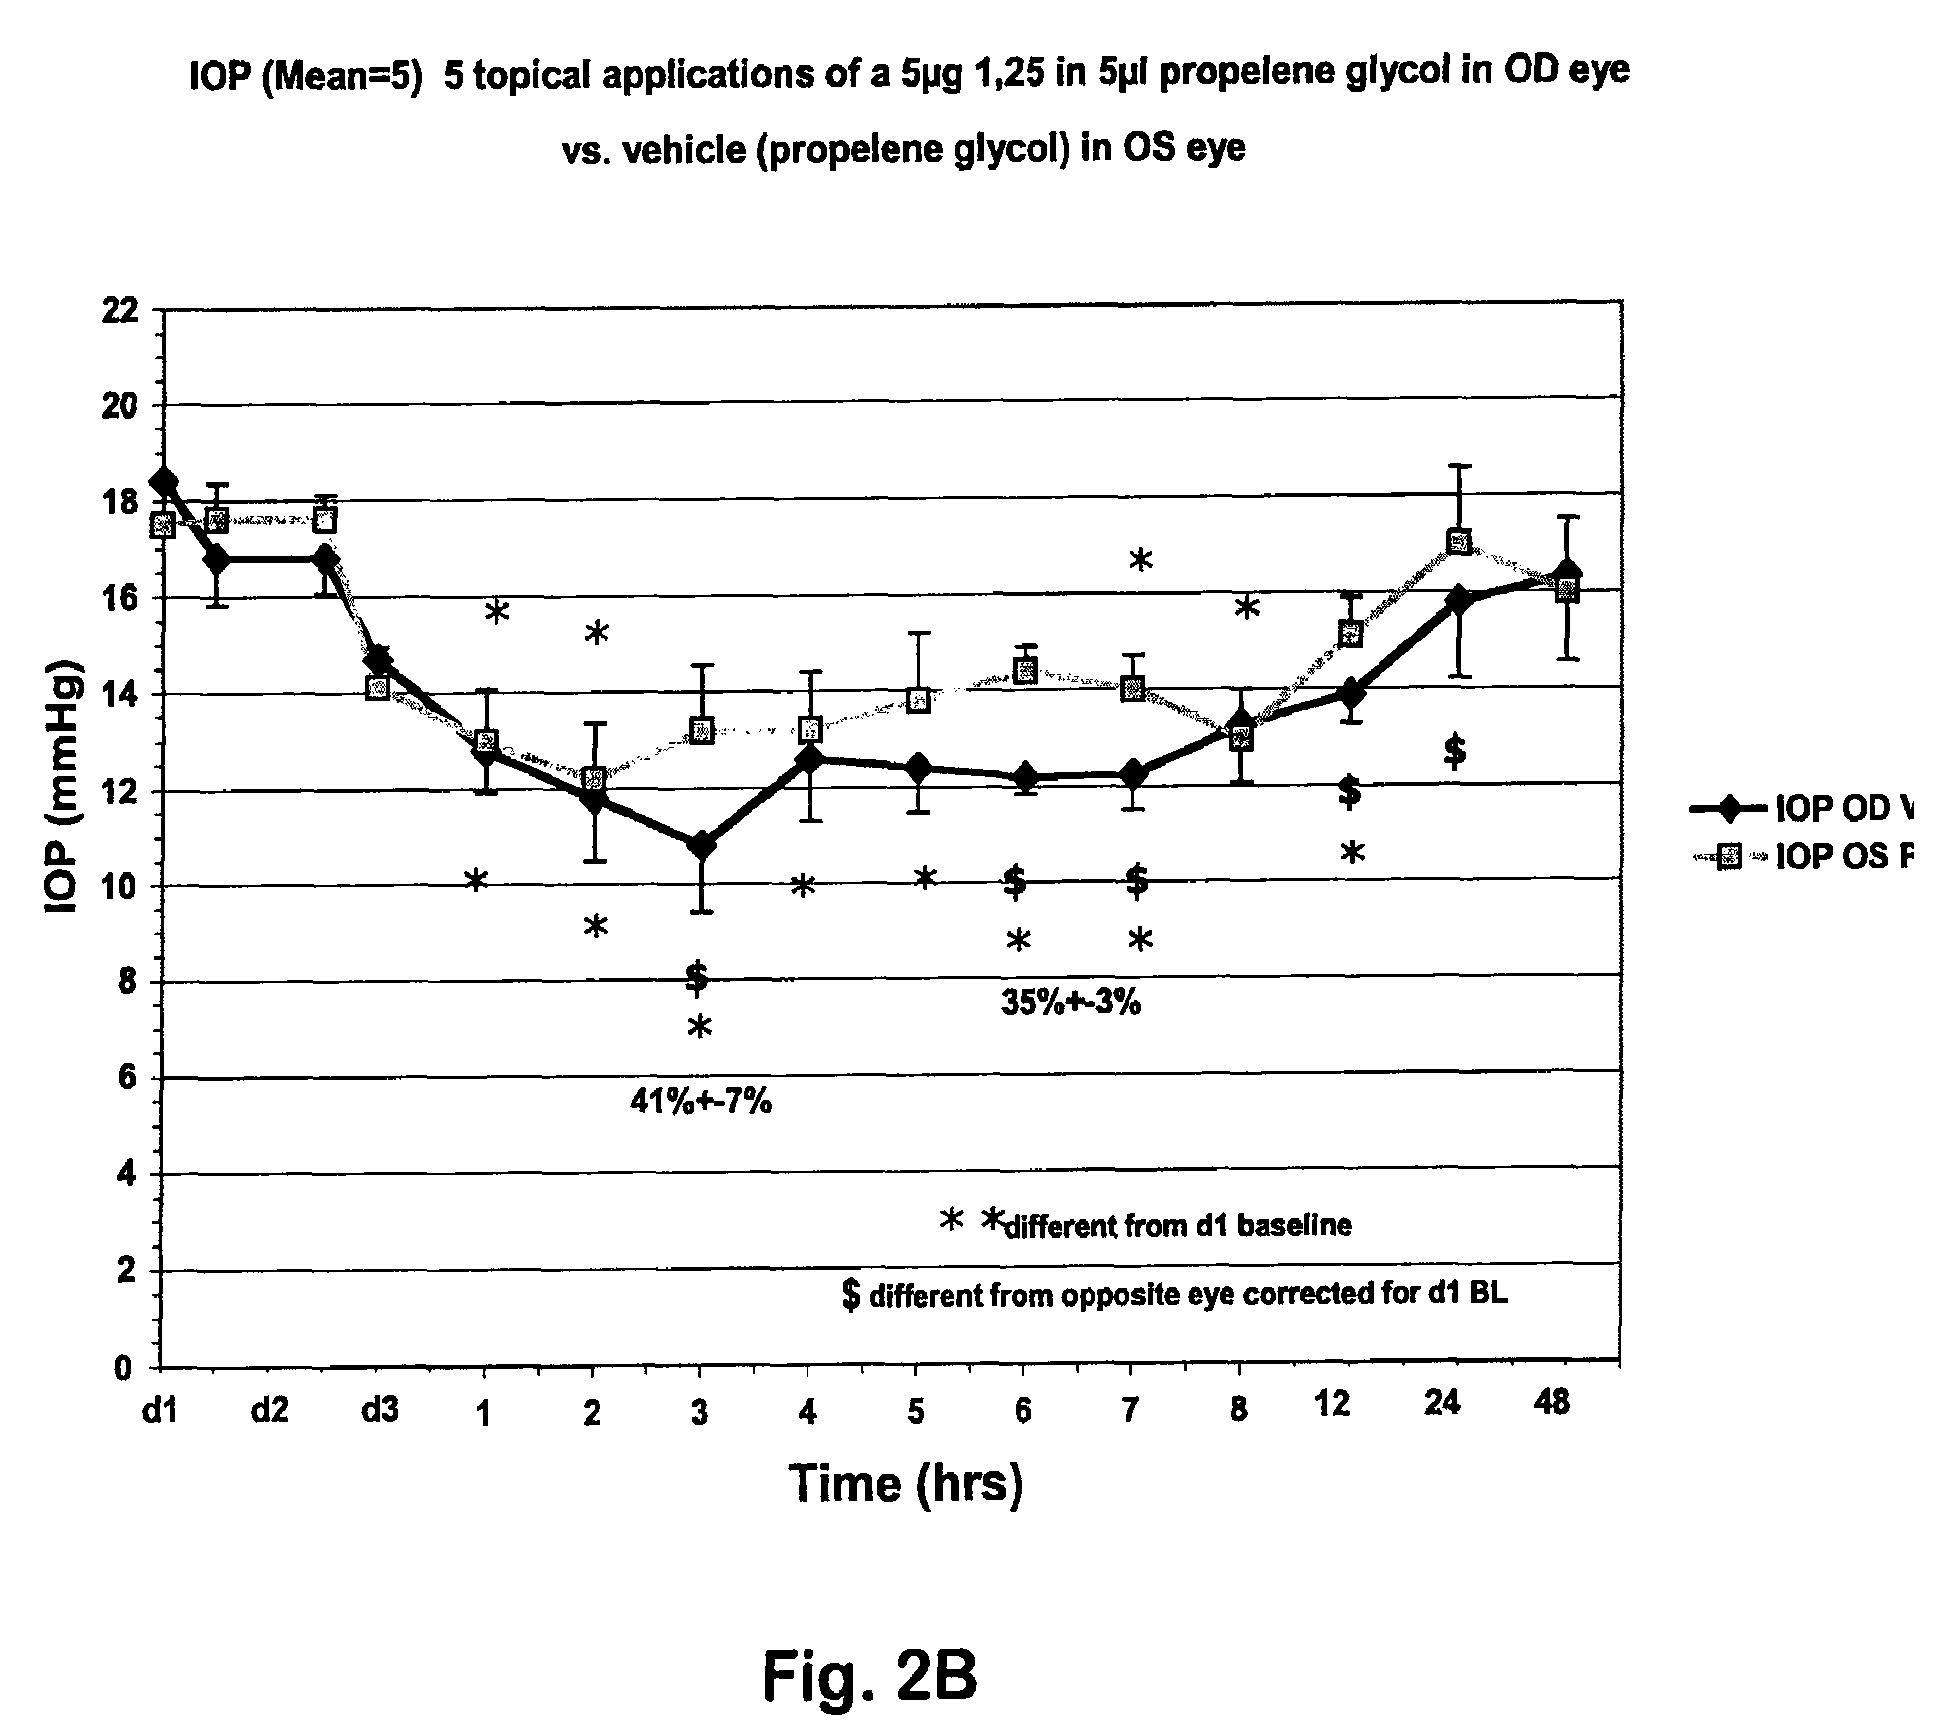 Vitamin D compounds and methods for reducing ocular hypertension (OHT)